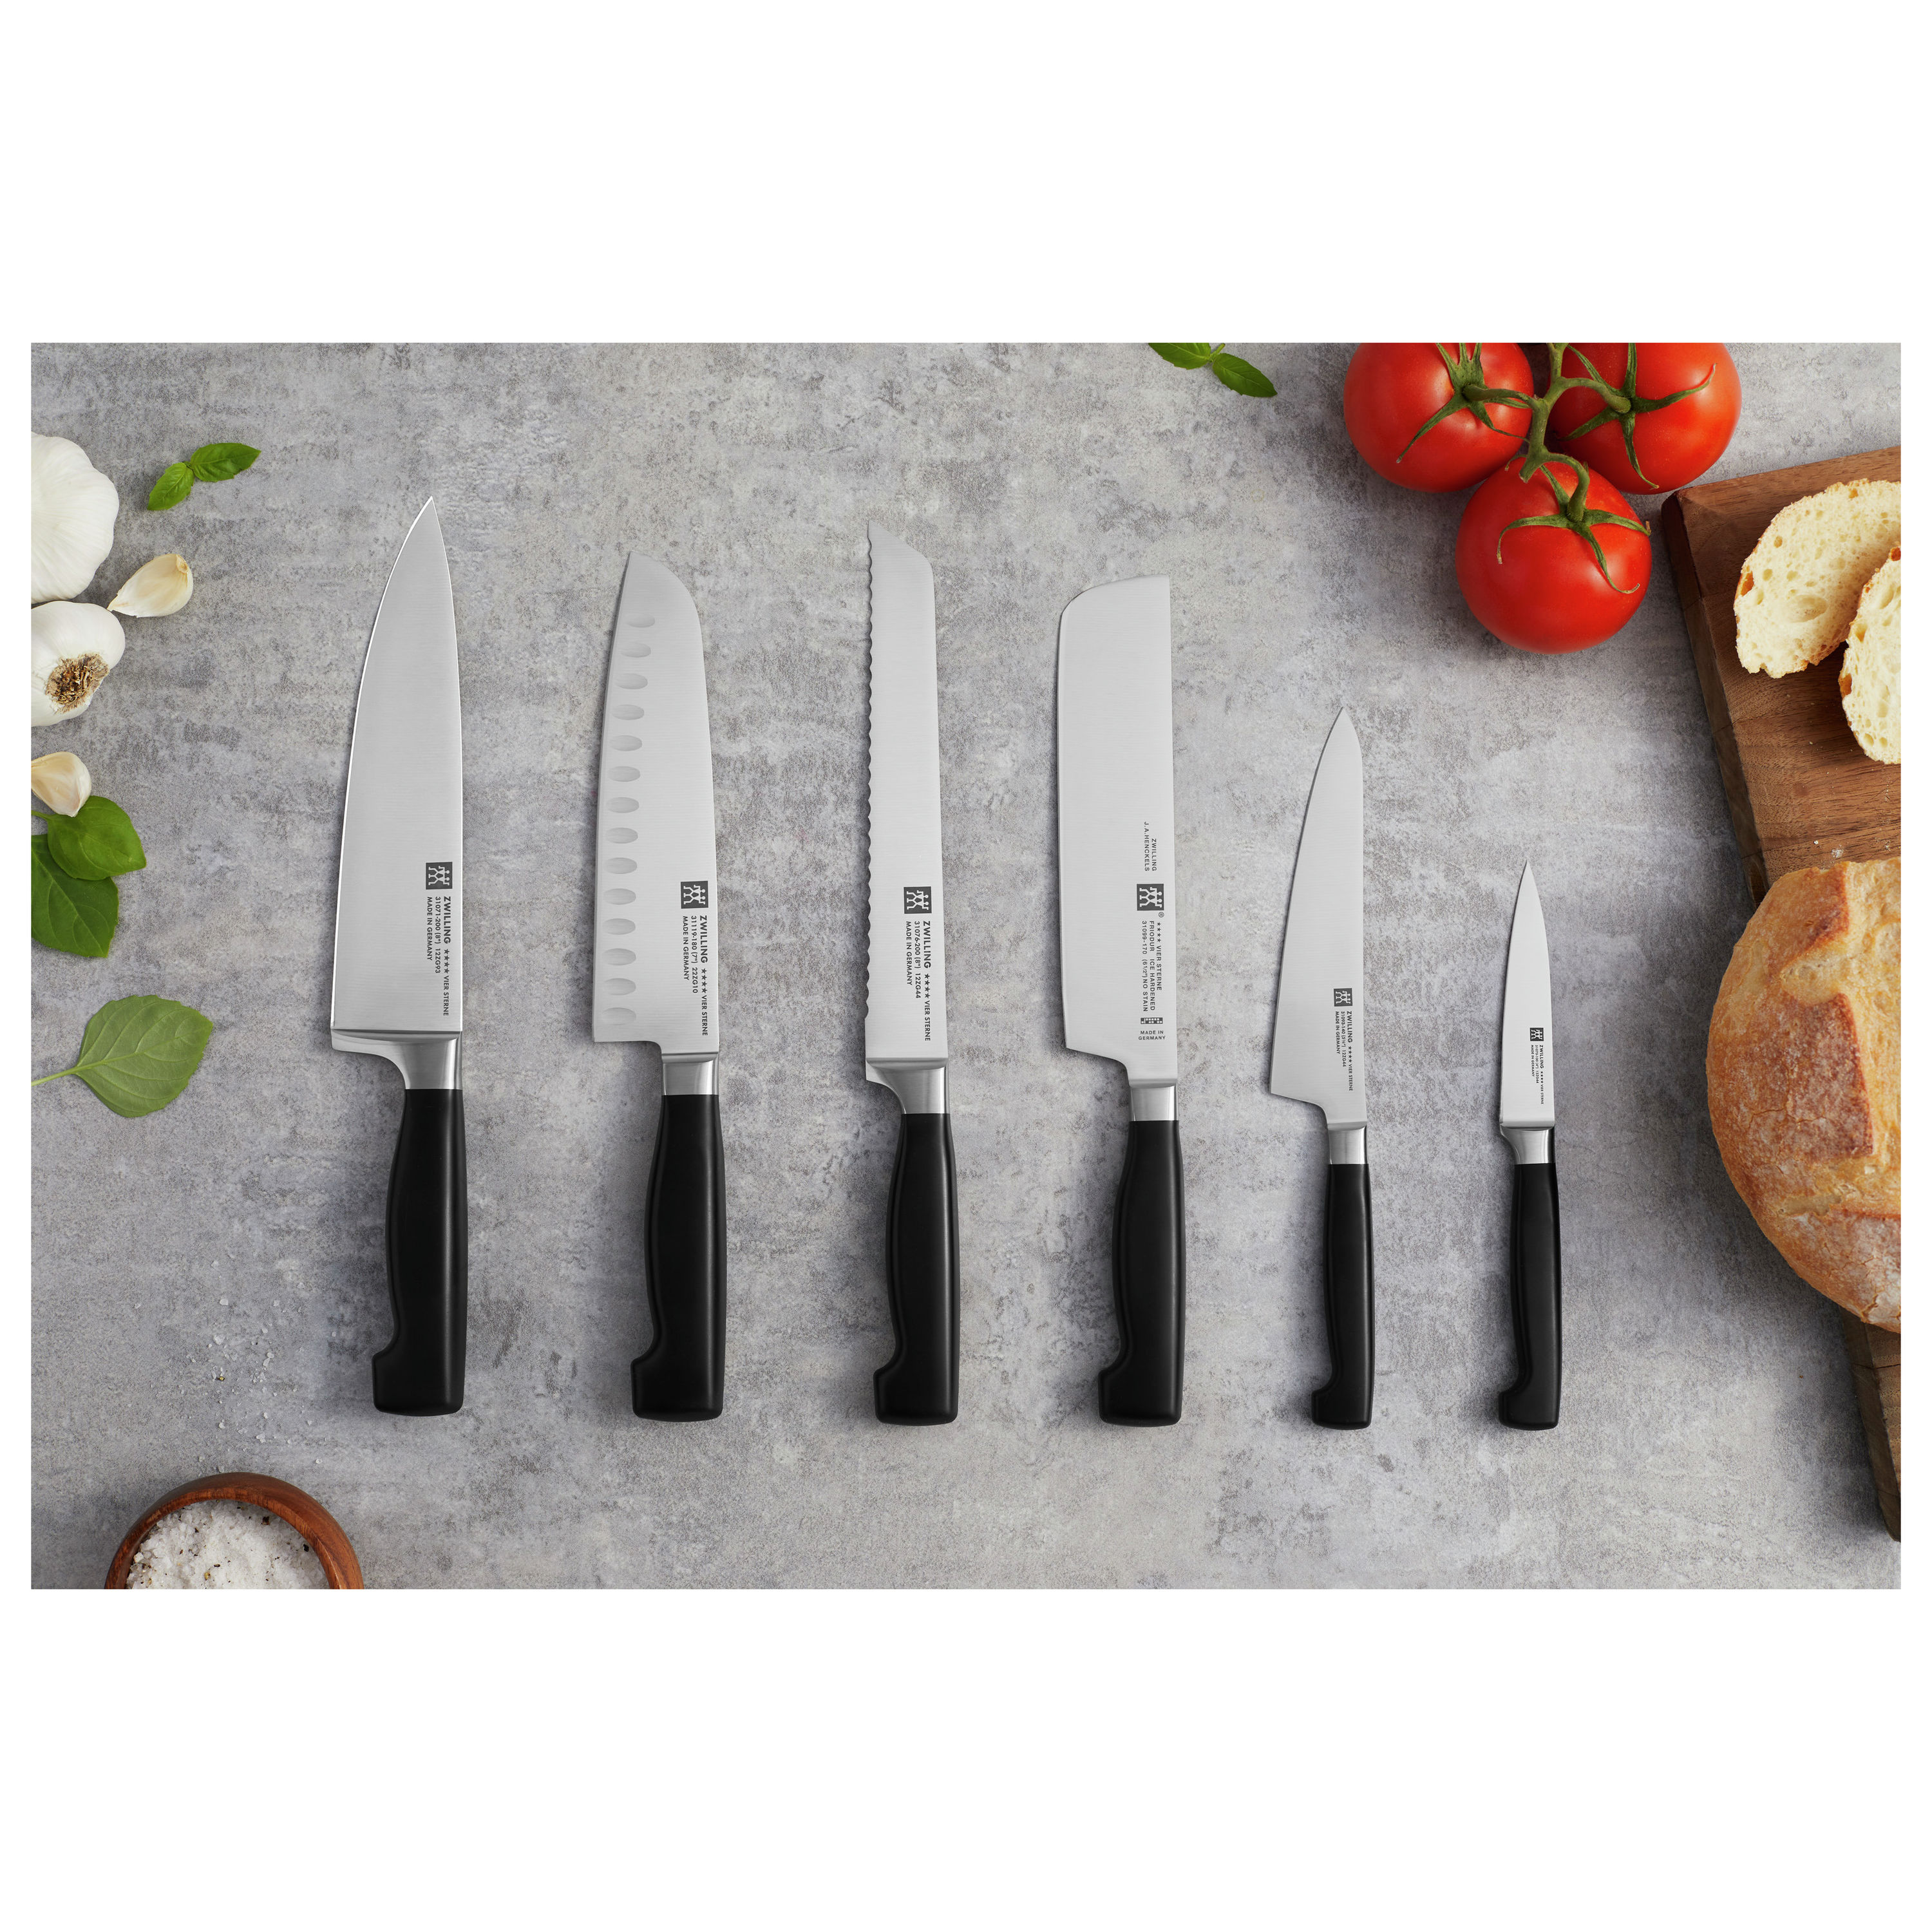 Zwilling J.A. Henckels Four Star Chef's Paring Knife, 4 in. - Fante's  Kitchen Shop - Since 1906